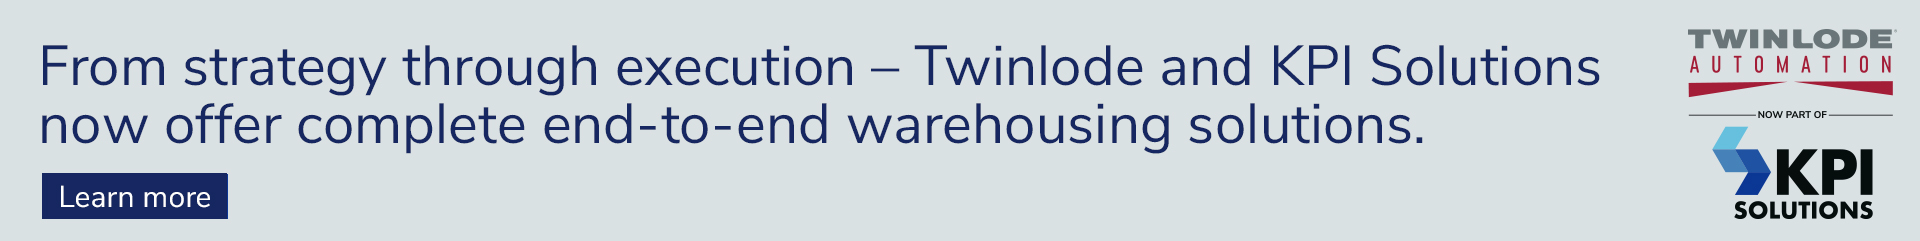 Twinlode Automation and KPI Solutions join forces to offer complete end-to-end warehousing solutions.